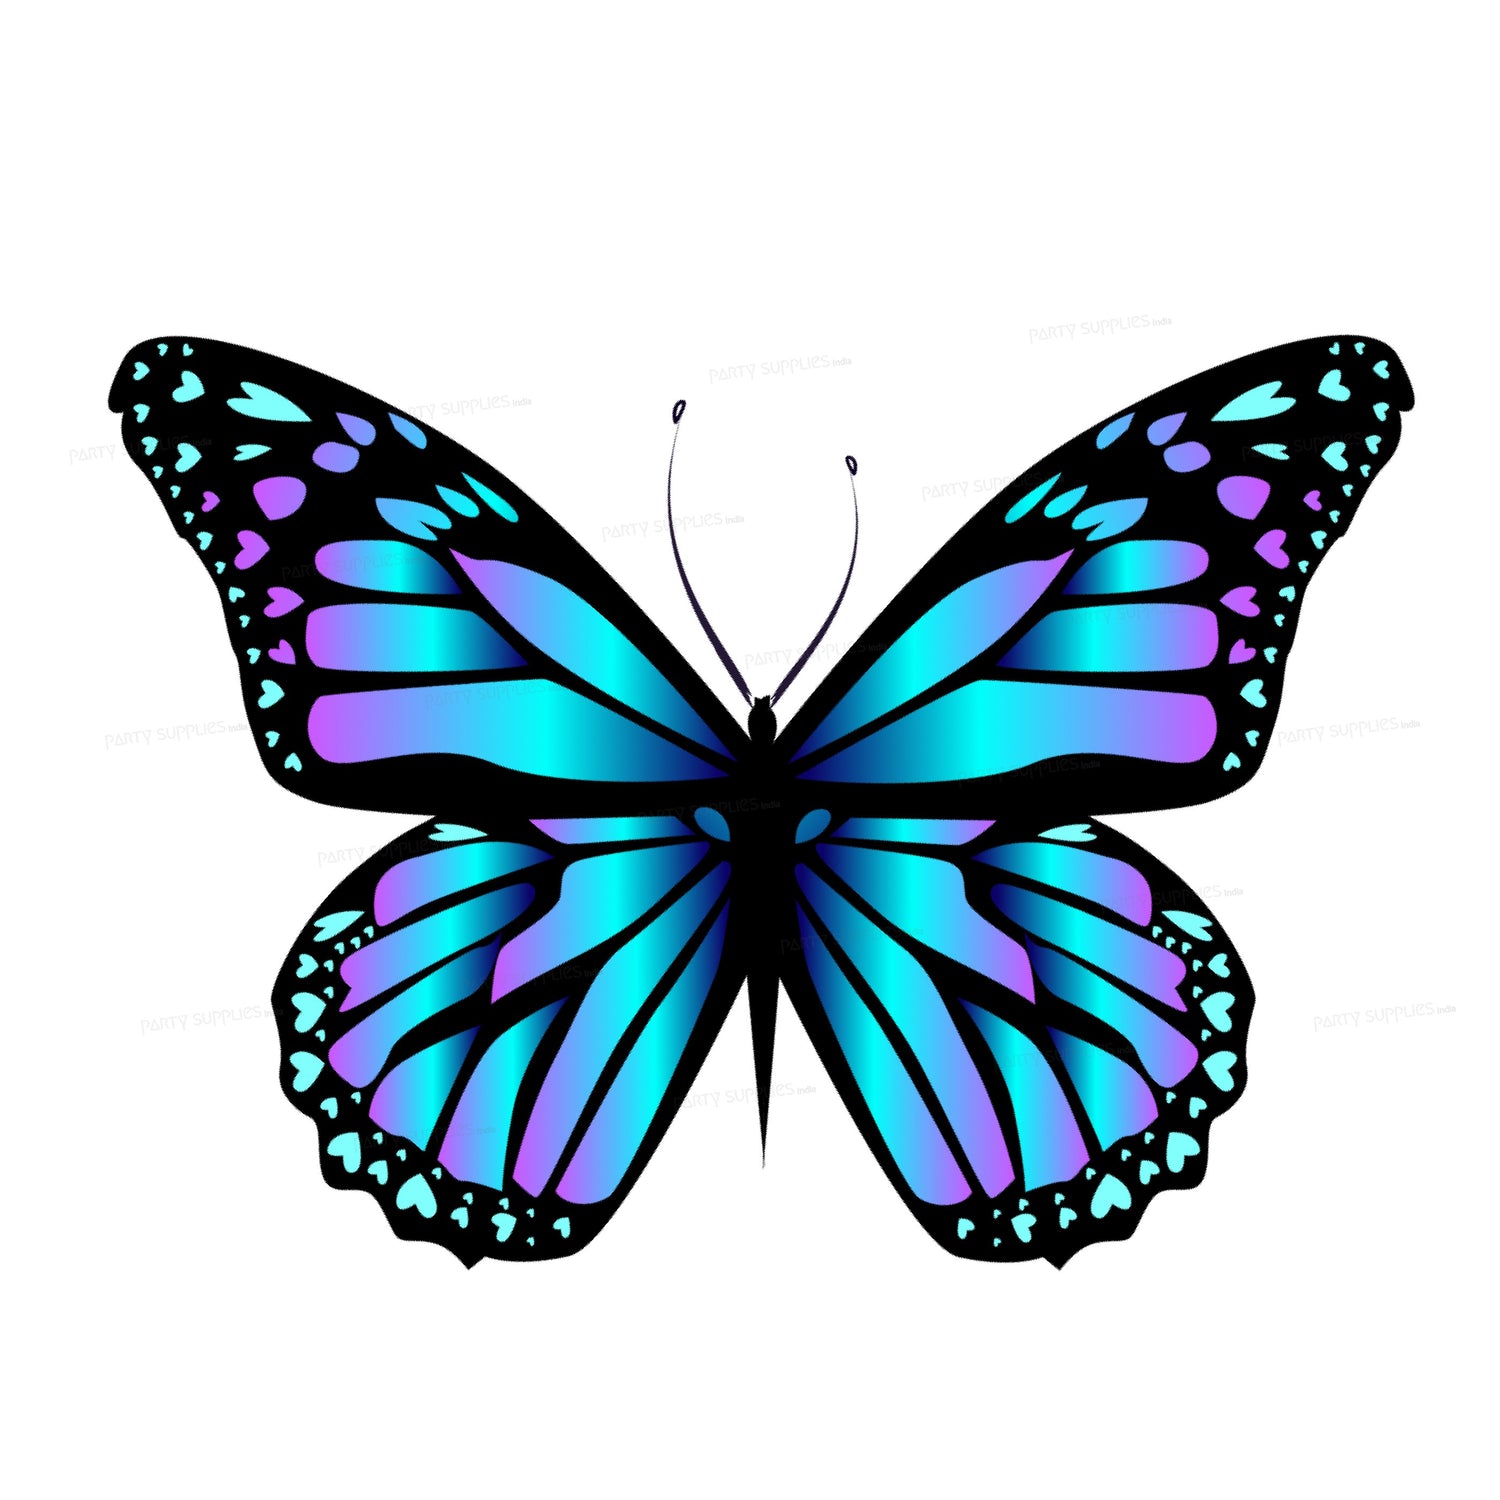 PSI Butterfly Theme Cutout - 02 | Party Supplies India Online